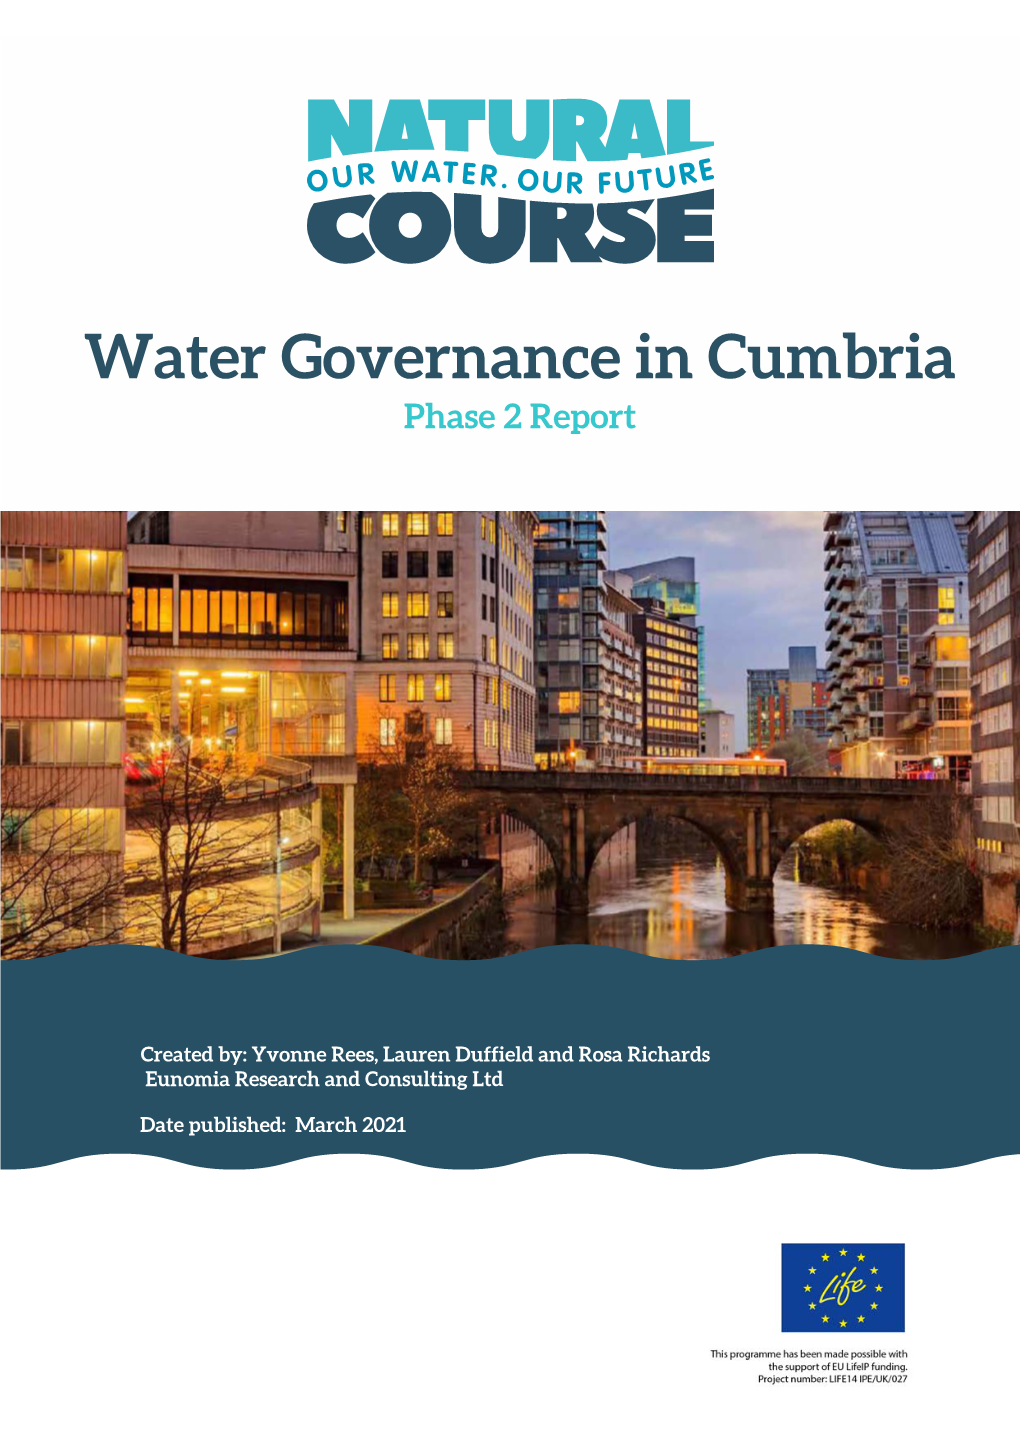 Water Governance Study Phase 2 85